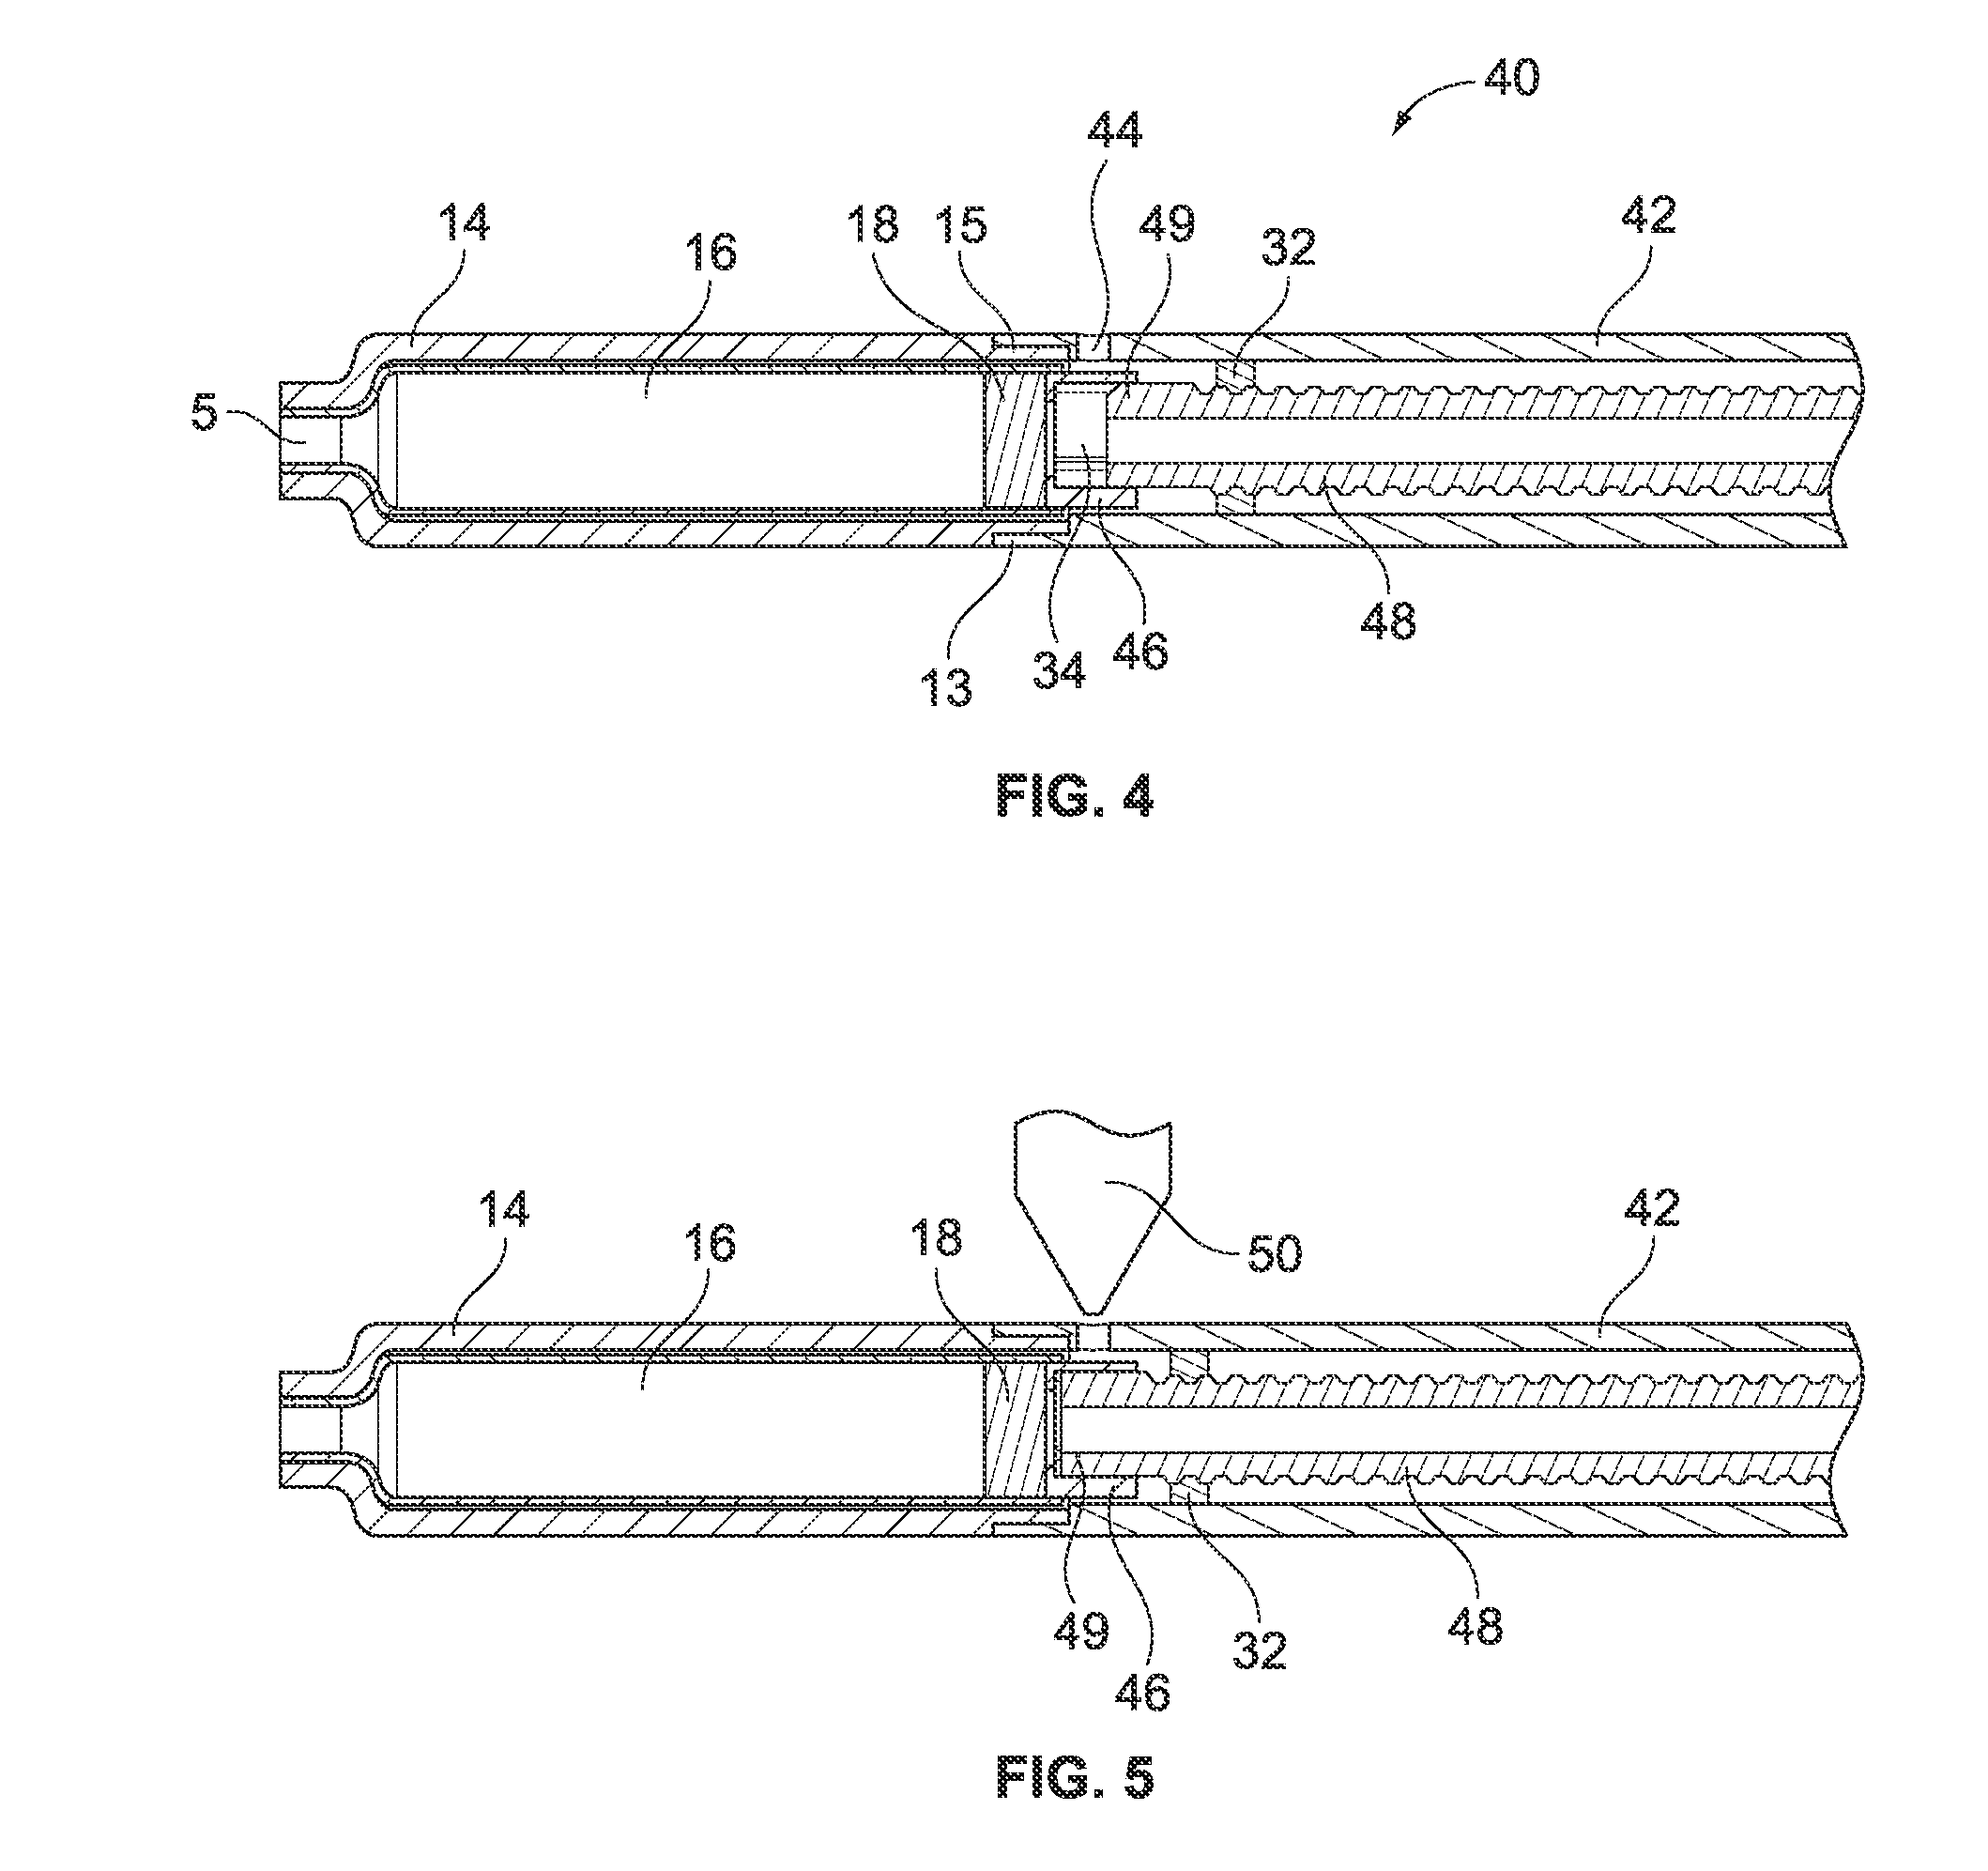 Drug delivery device for delivery of a medicament